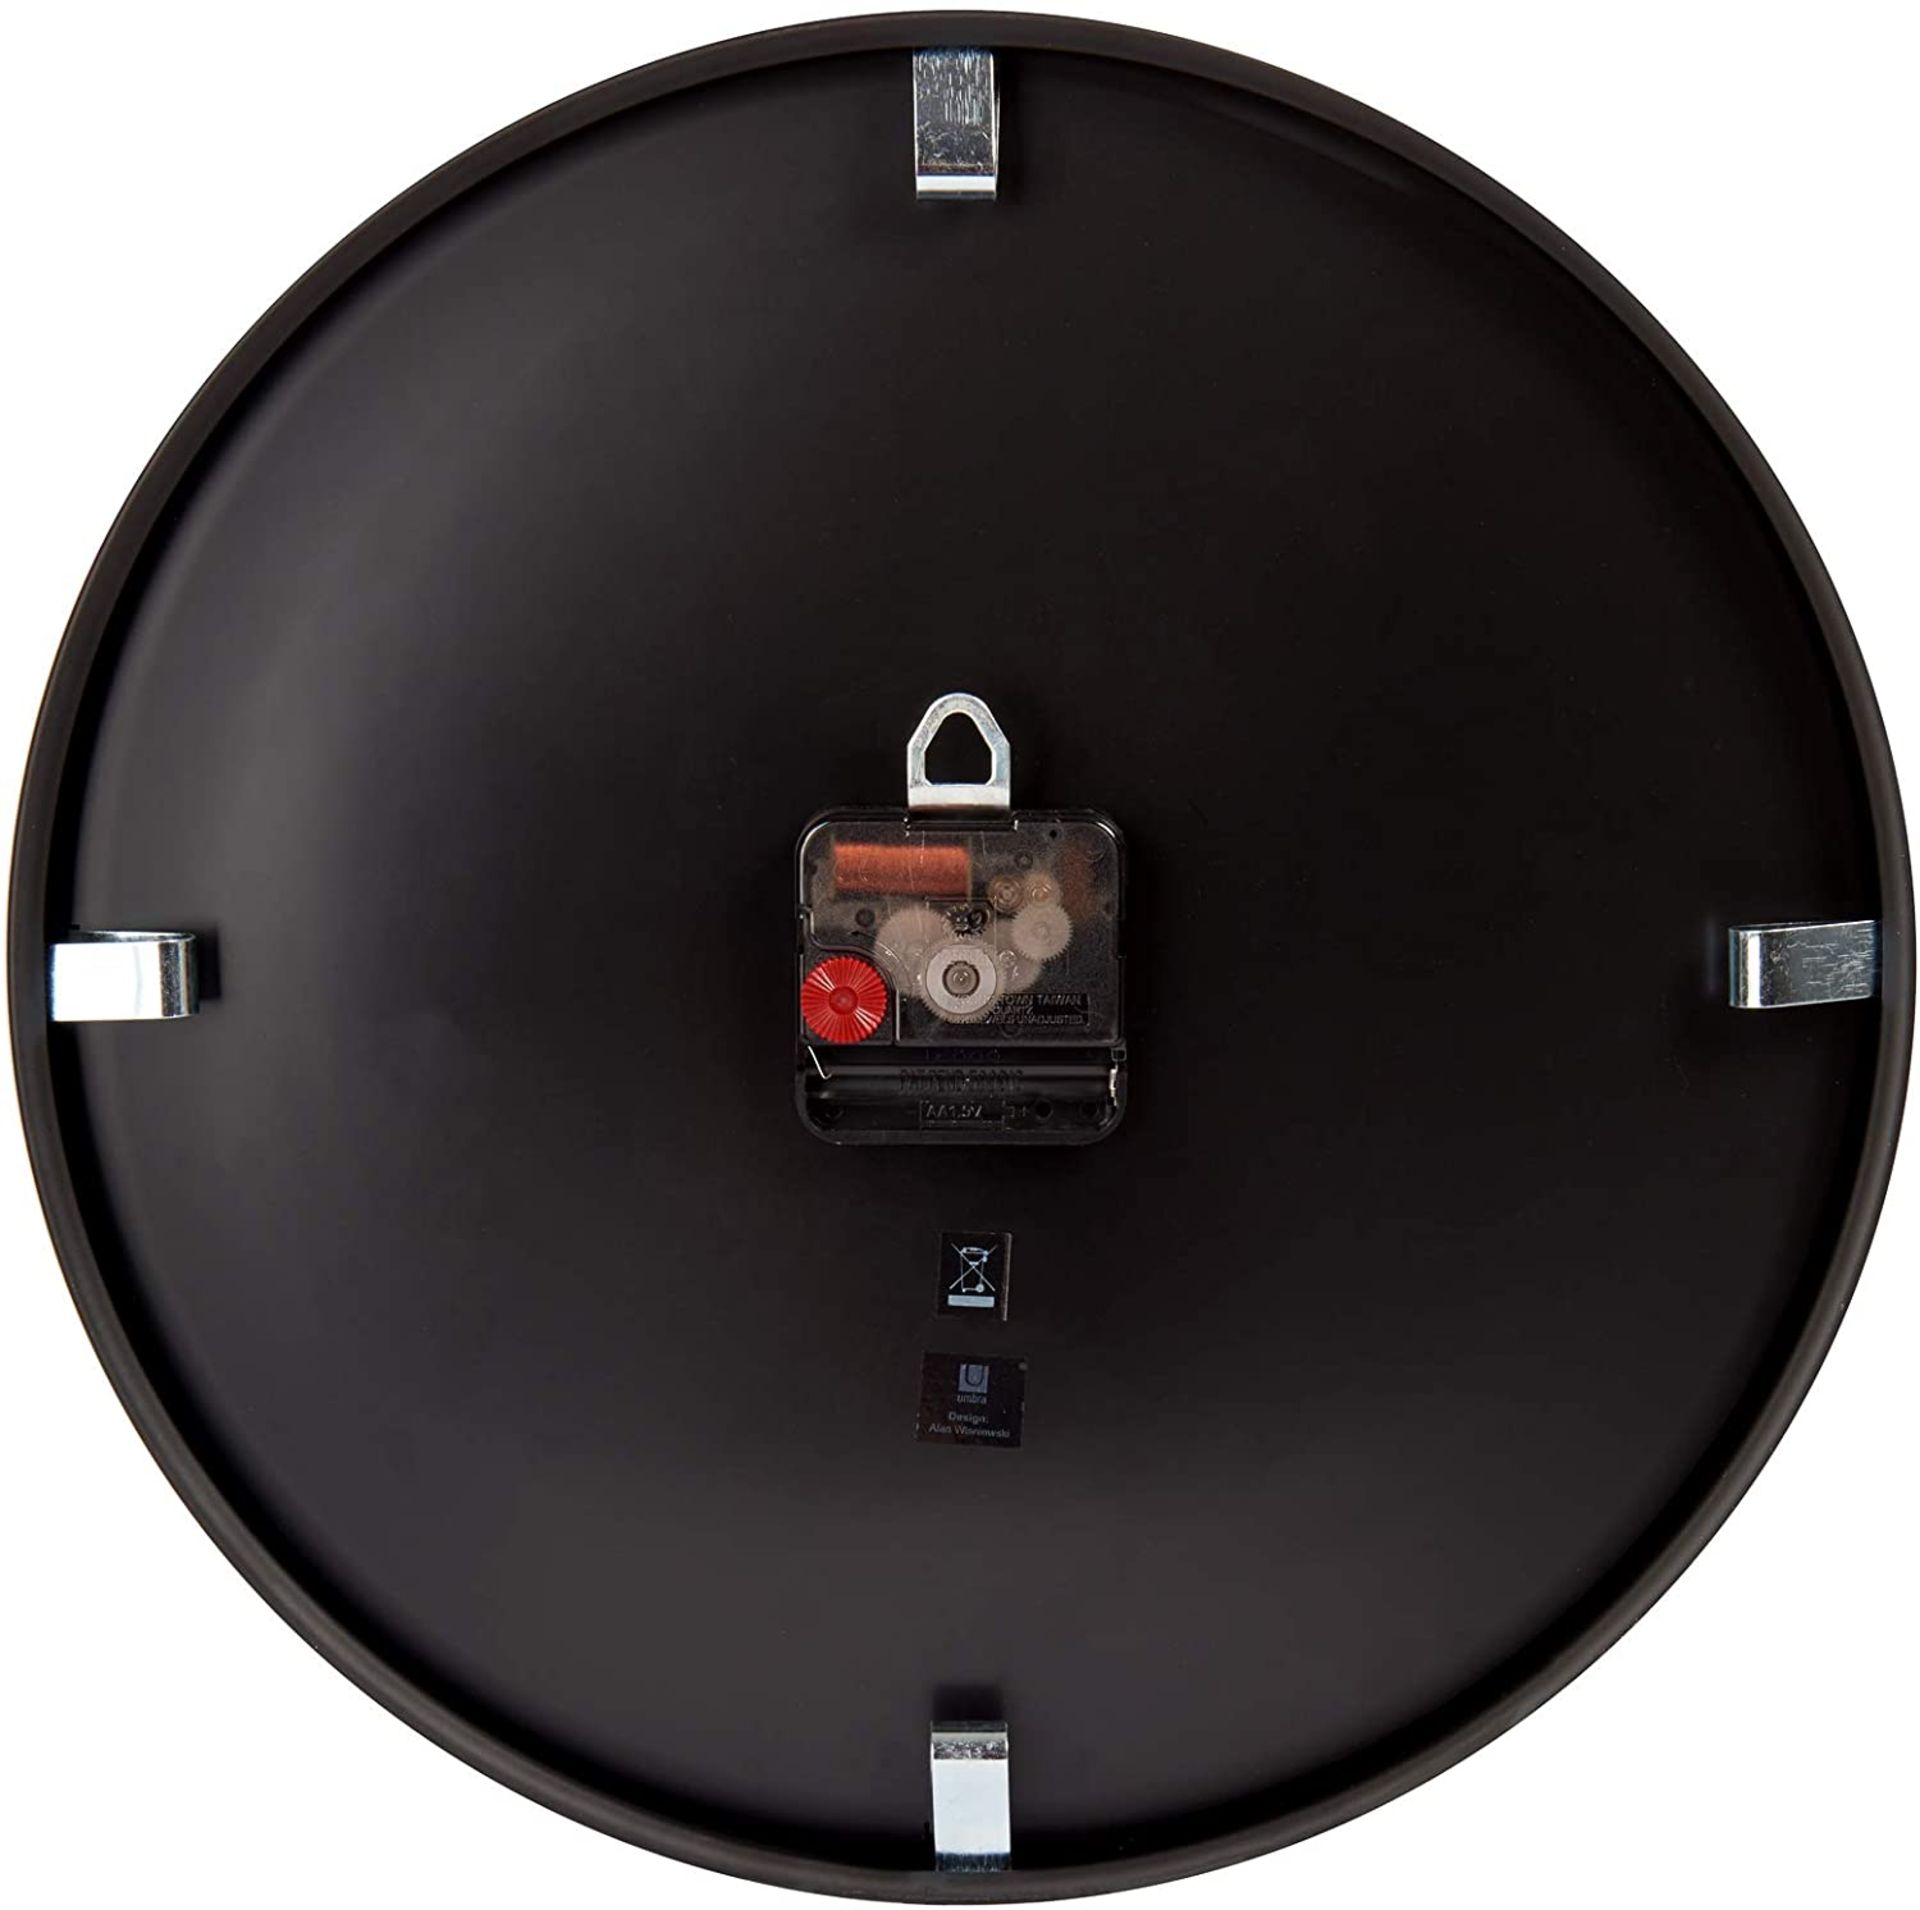 1 x 'Madera' Designer Wall Clock Featuring A Black Frame And Walnut Face - 32cm Diameter - Brand New - Image 4 of 5